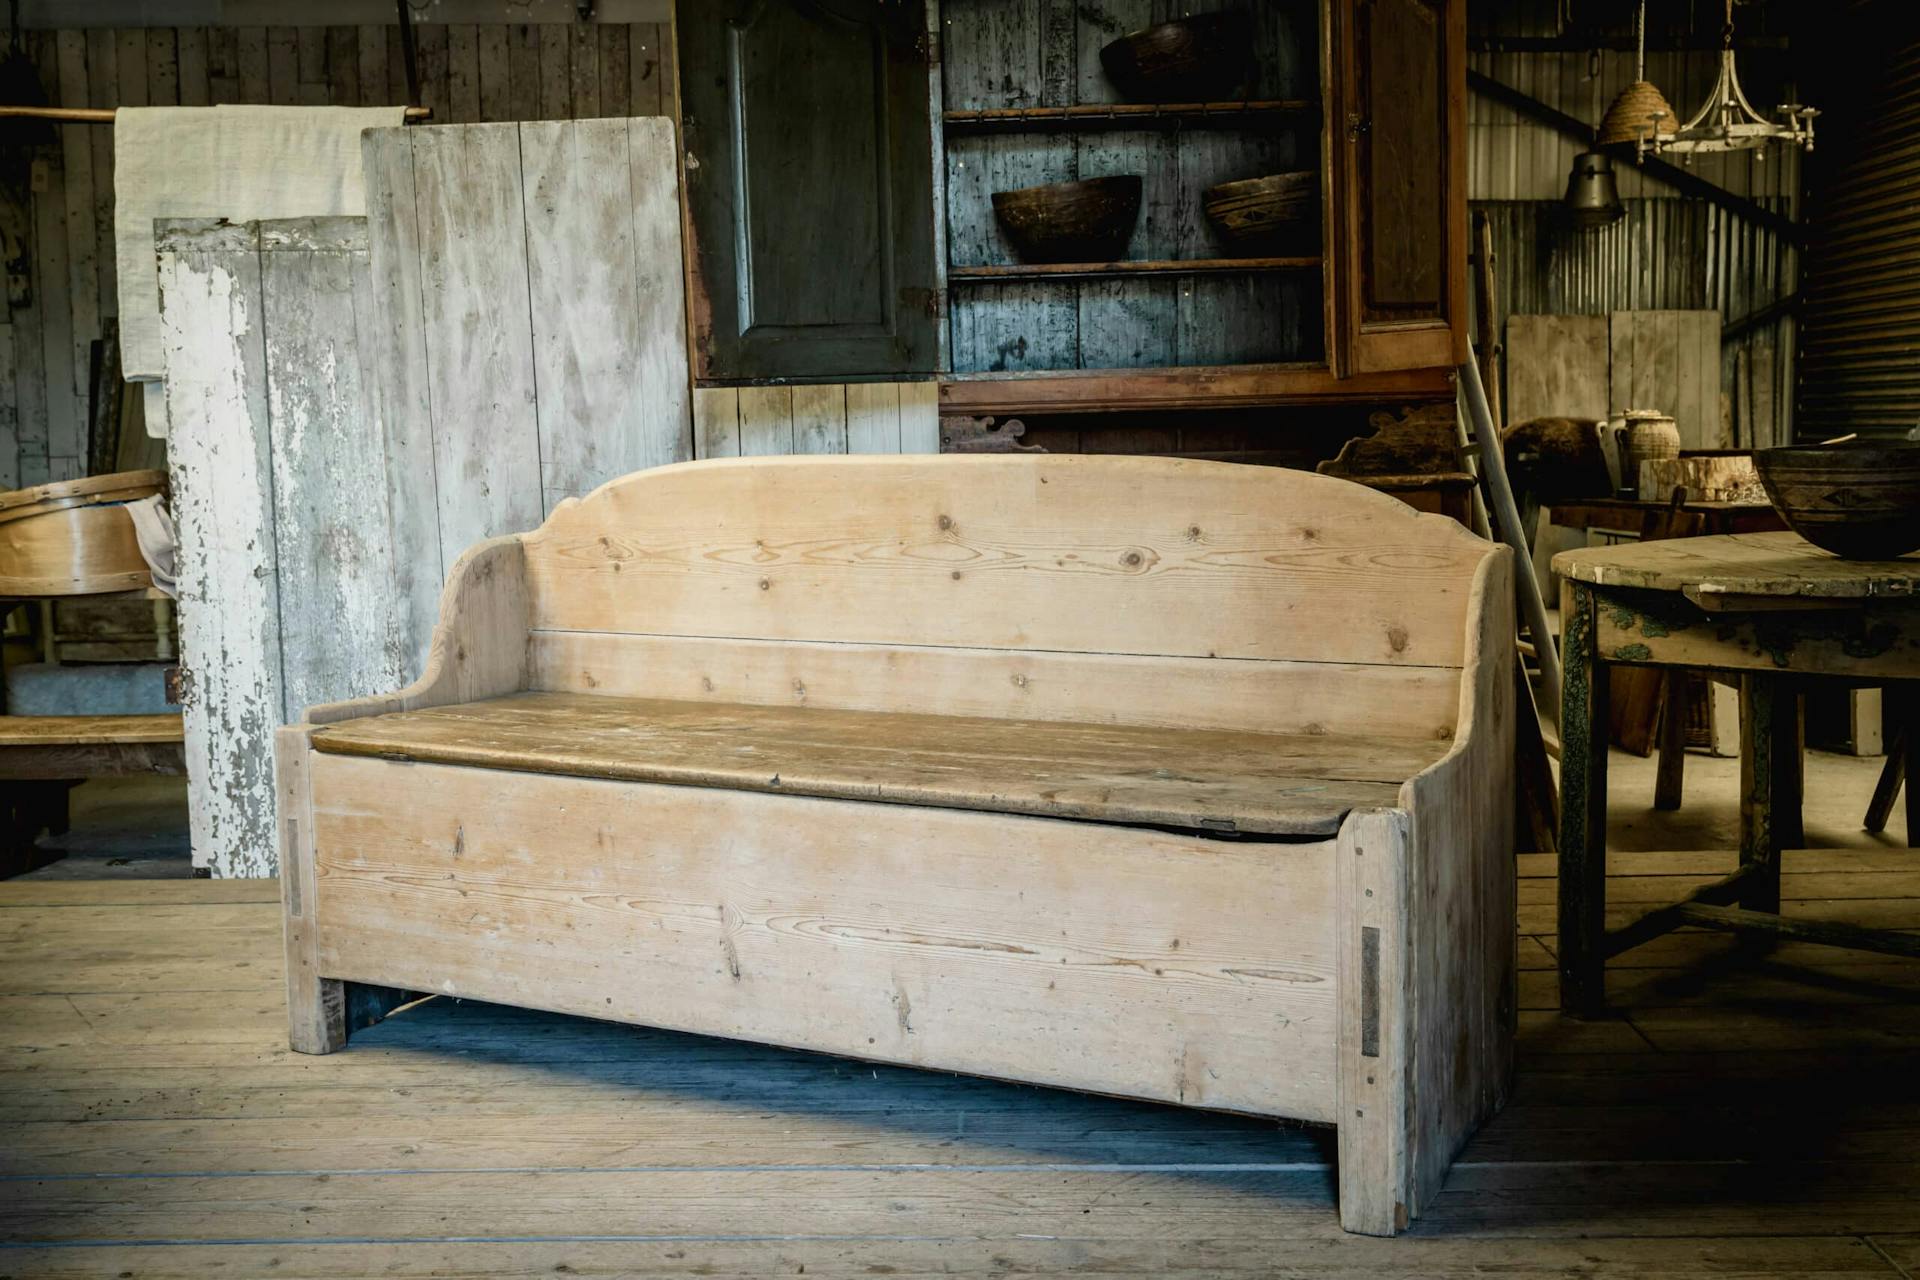 Original Pitch Pine Bench from the Jämtland area of Sweden